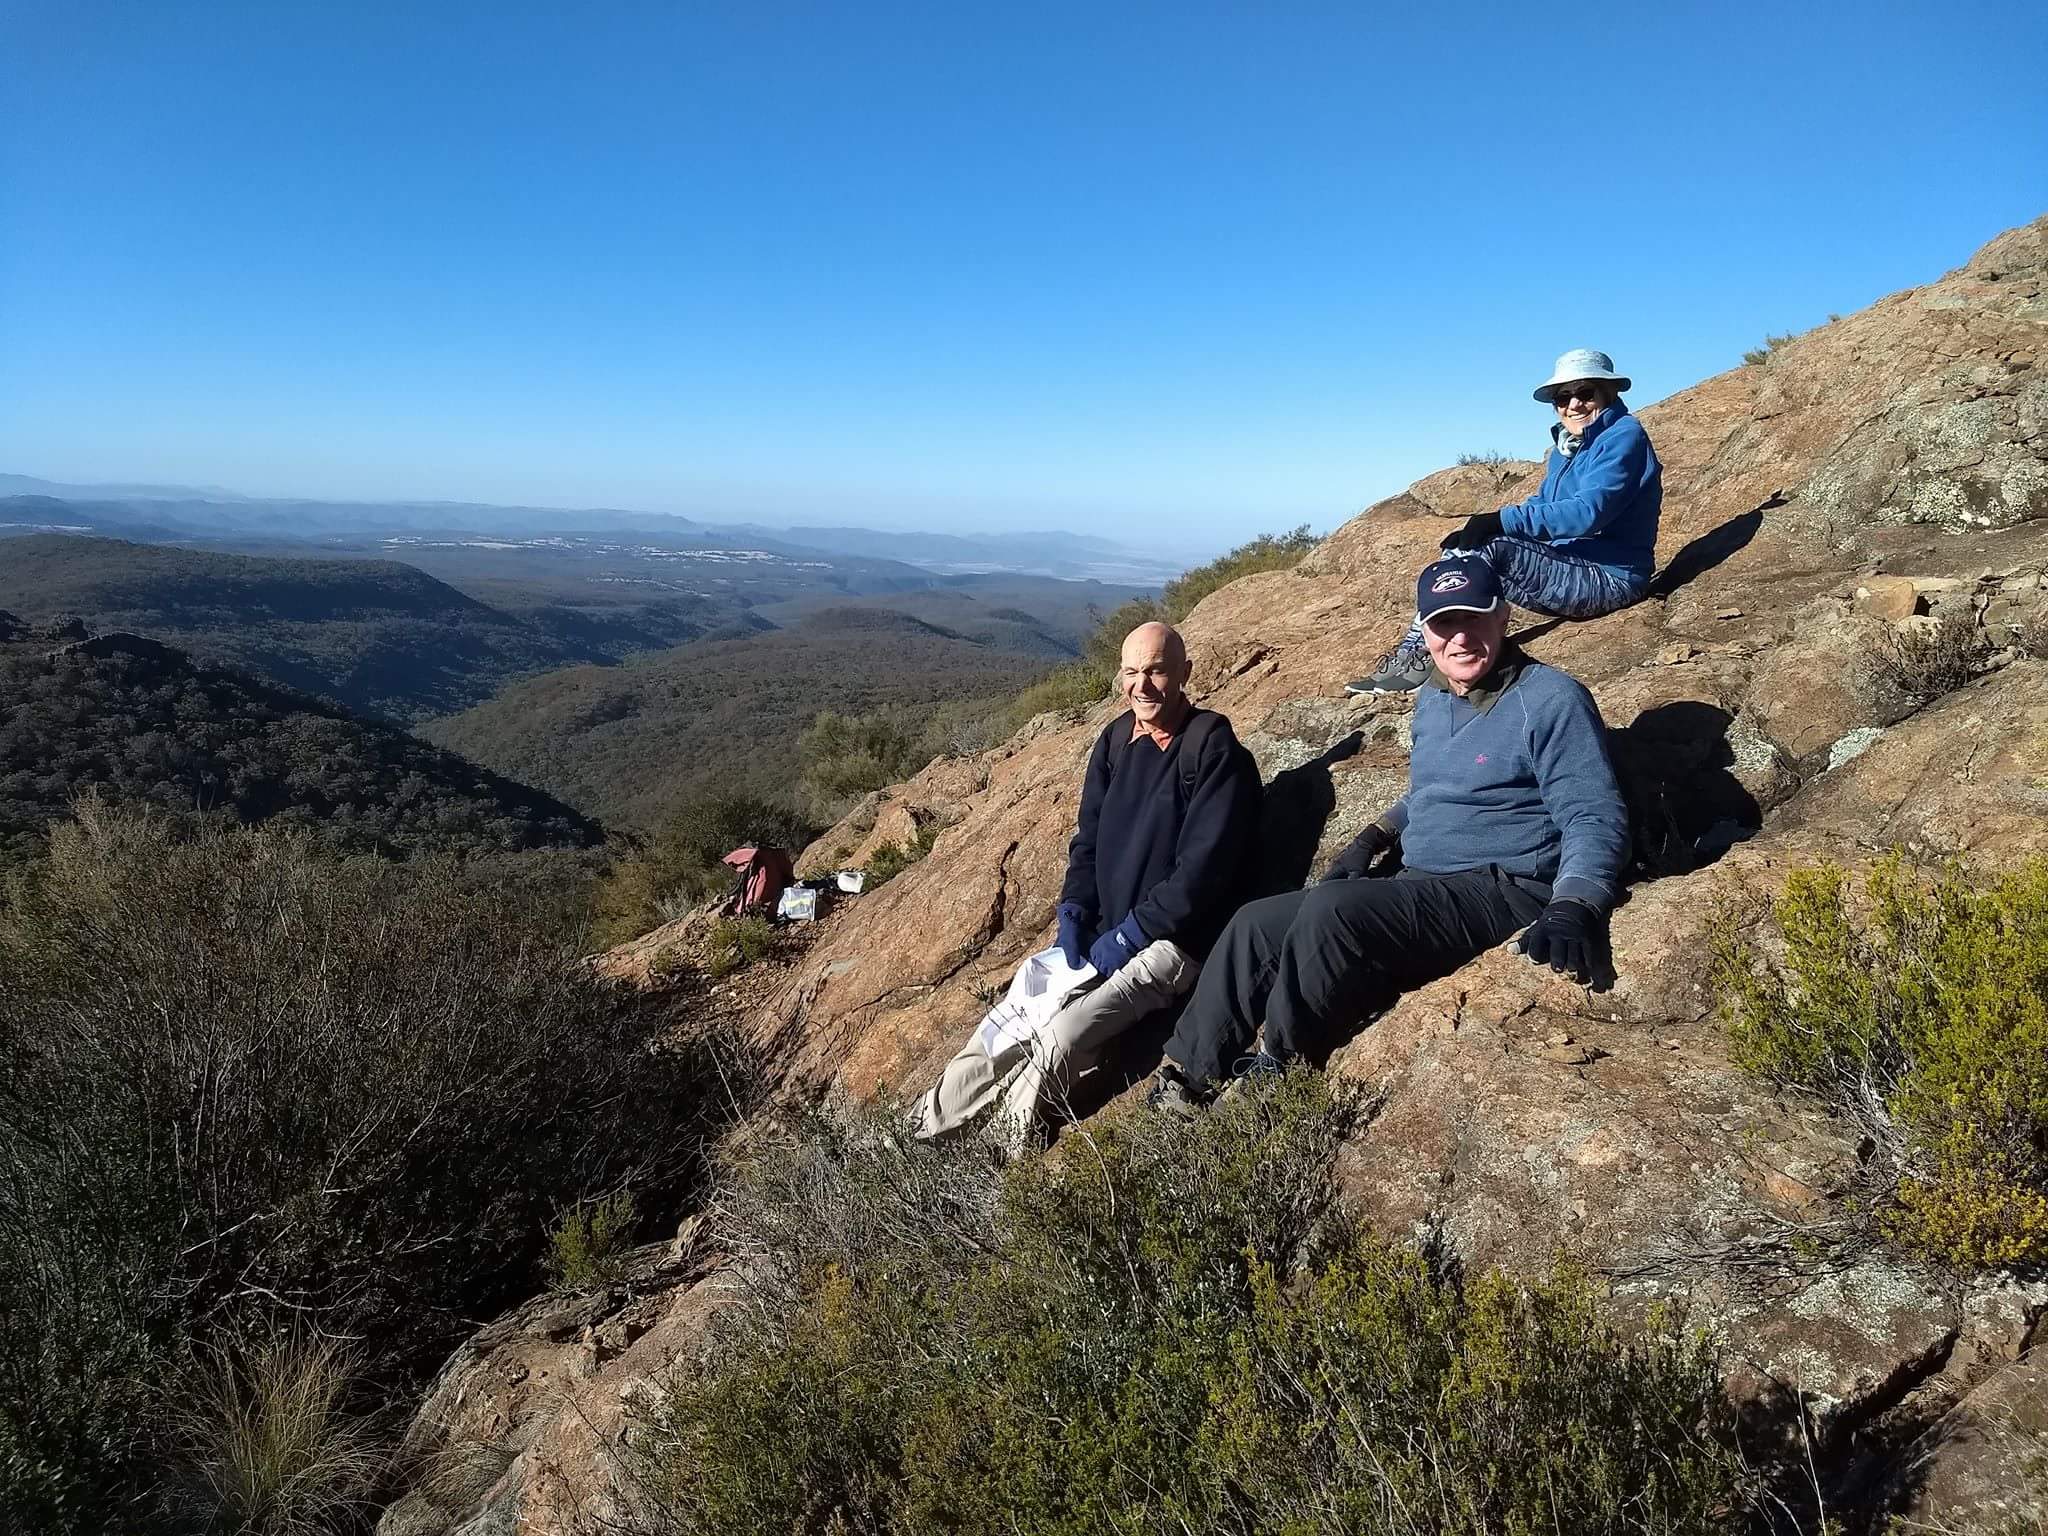 John Leculier, John McPherson and Jacqui Warnock high up on Yulludunida. The walking track is a challenging two-hour hike in Mount Kaputar National Park offering panoramic scenic views.